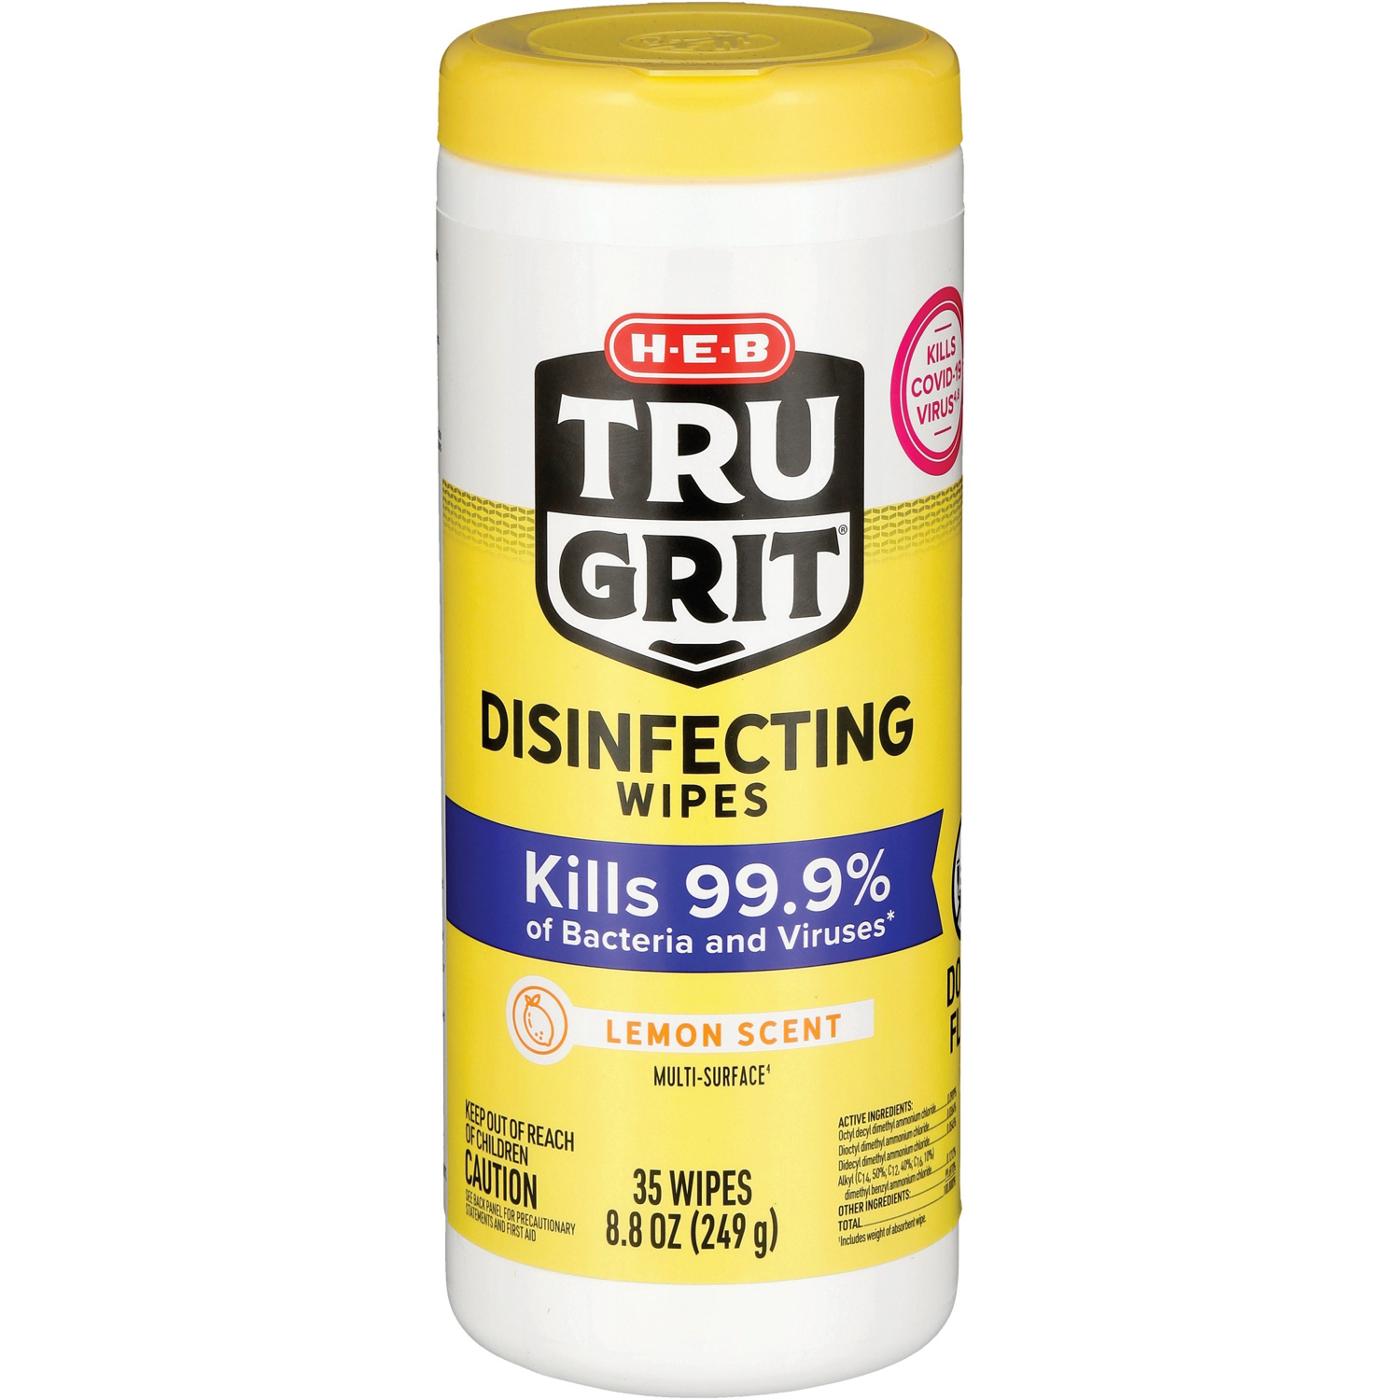 H-E-B Tru Grit Disinfecting Wipes - Lemon Scent; image 2 of 2